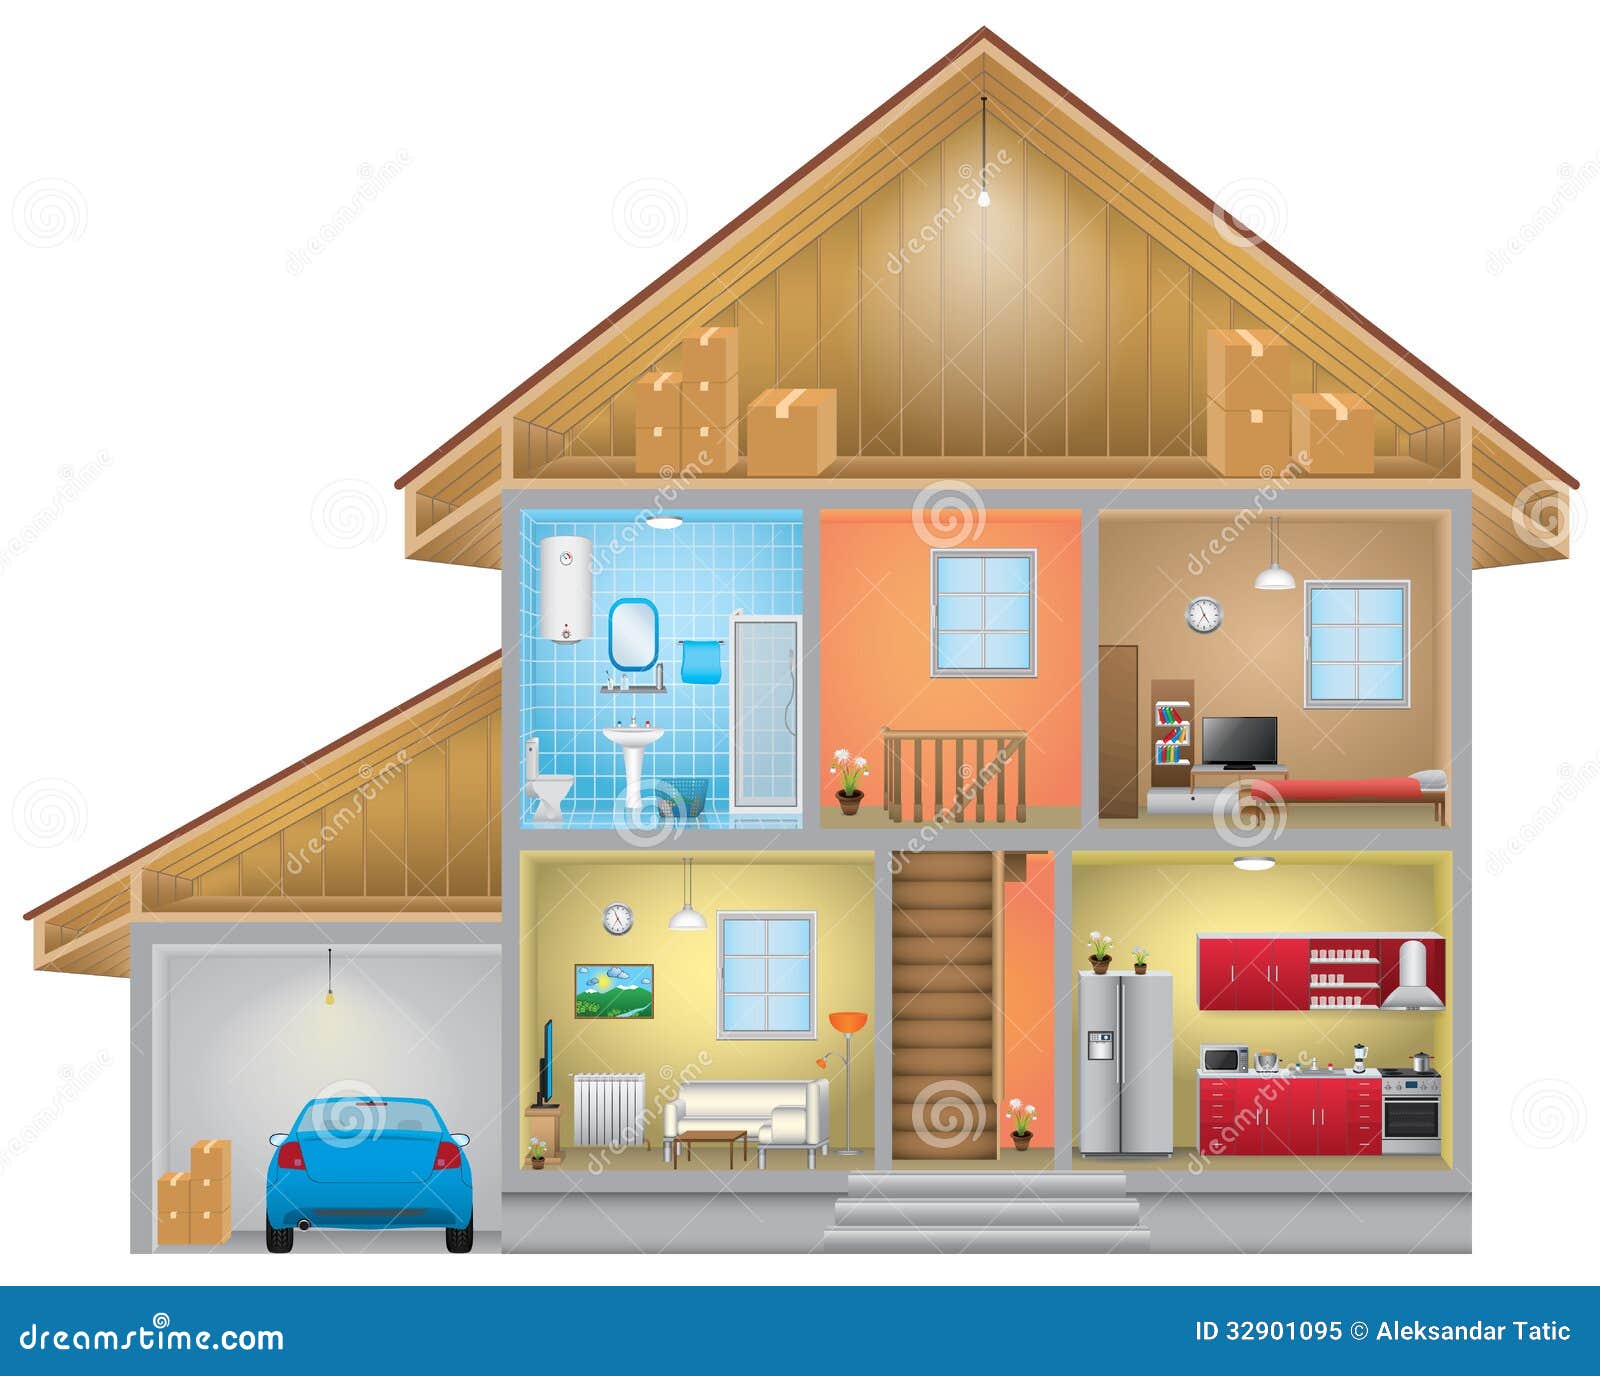 house layout clipart - photo #44